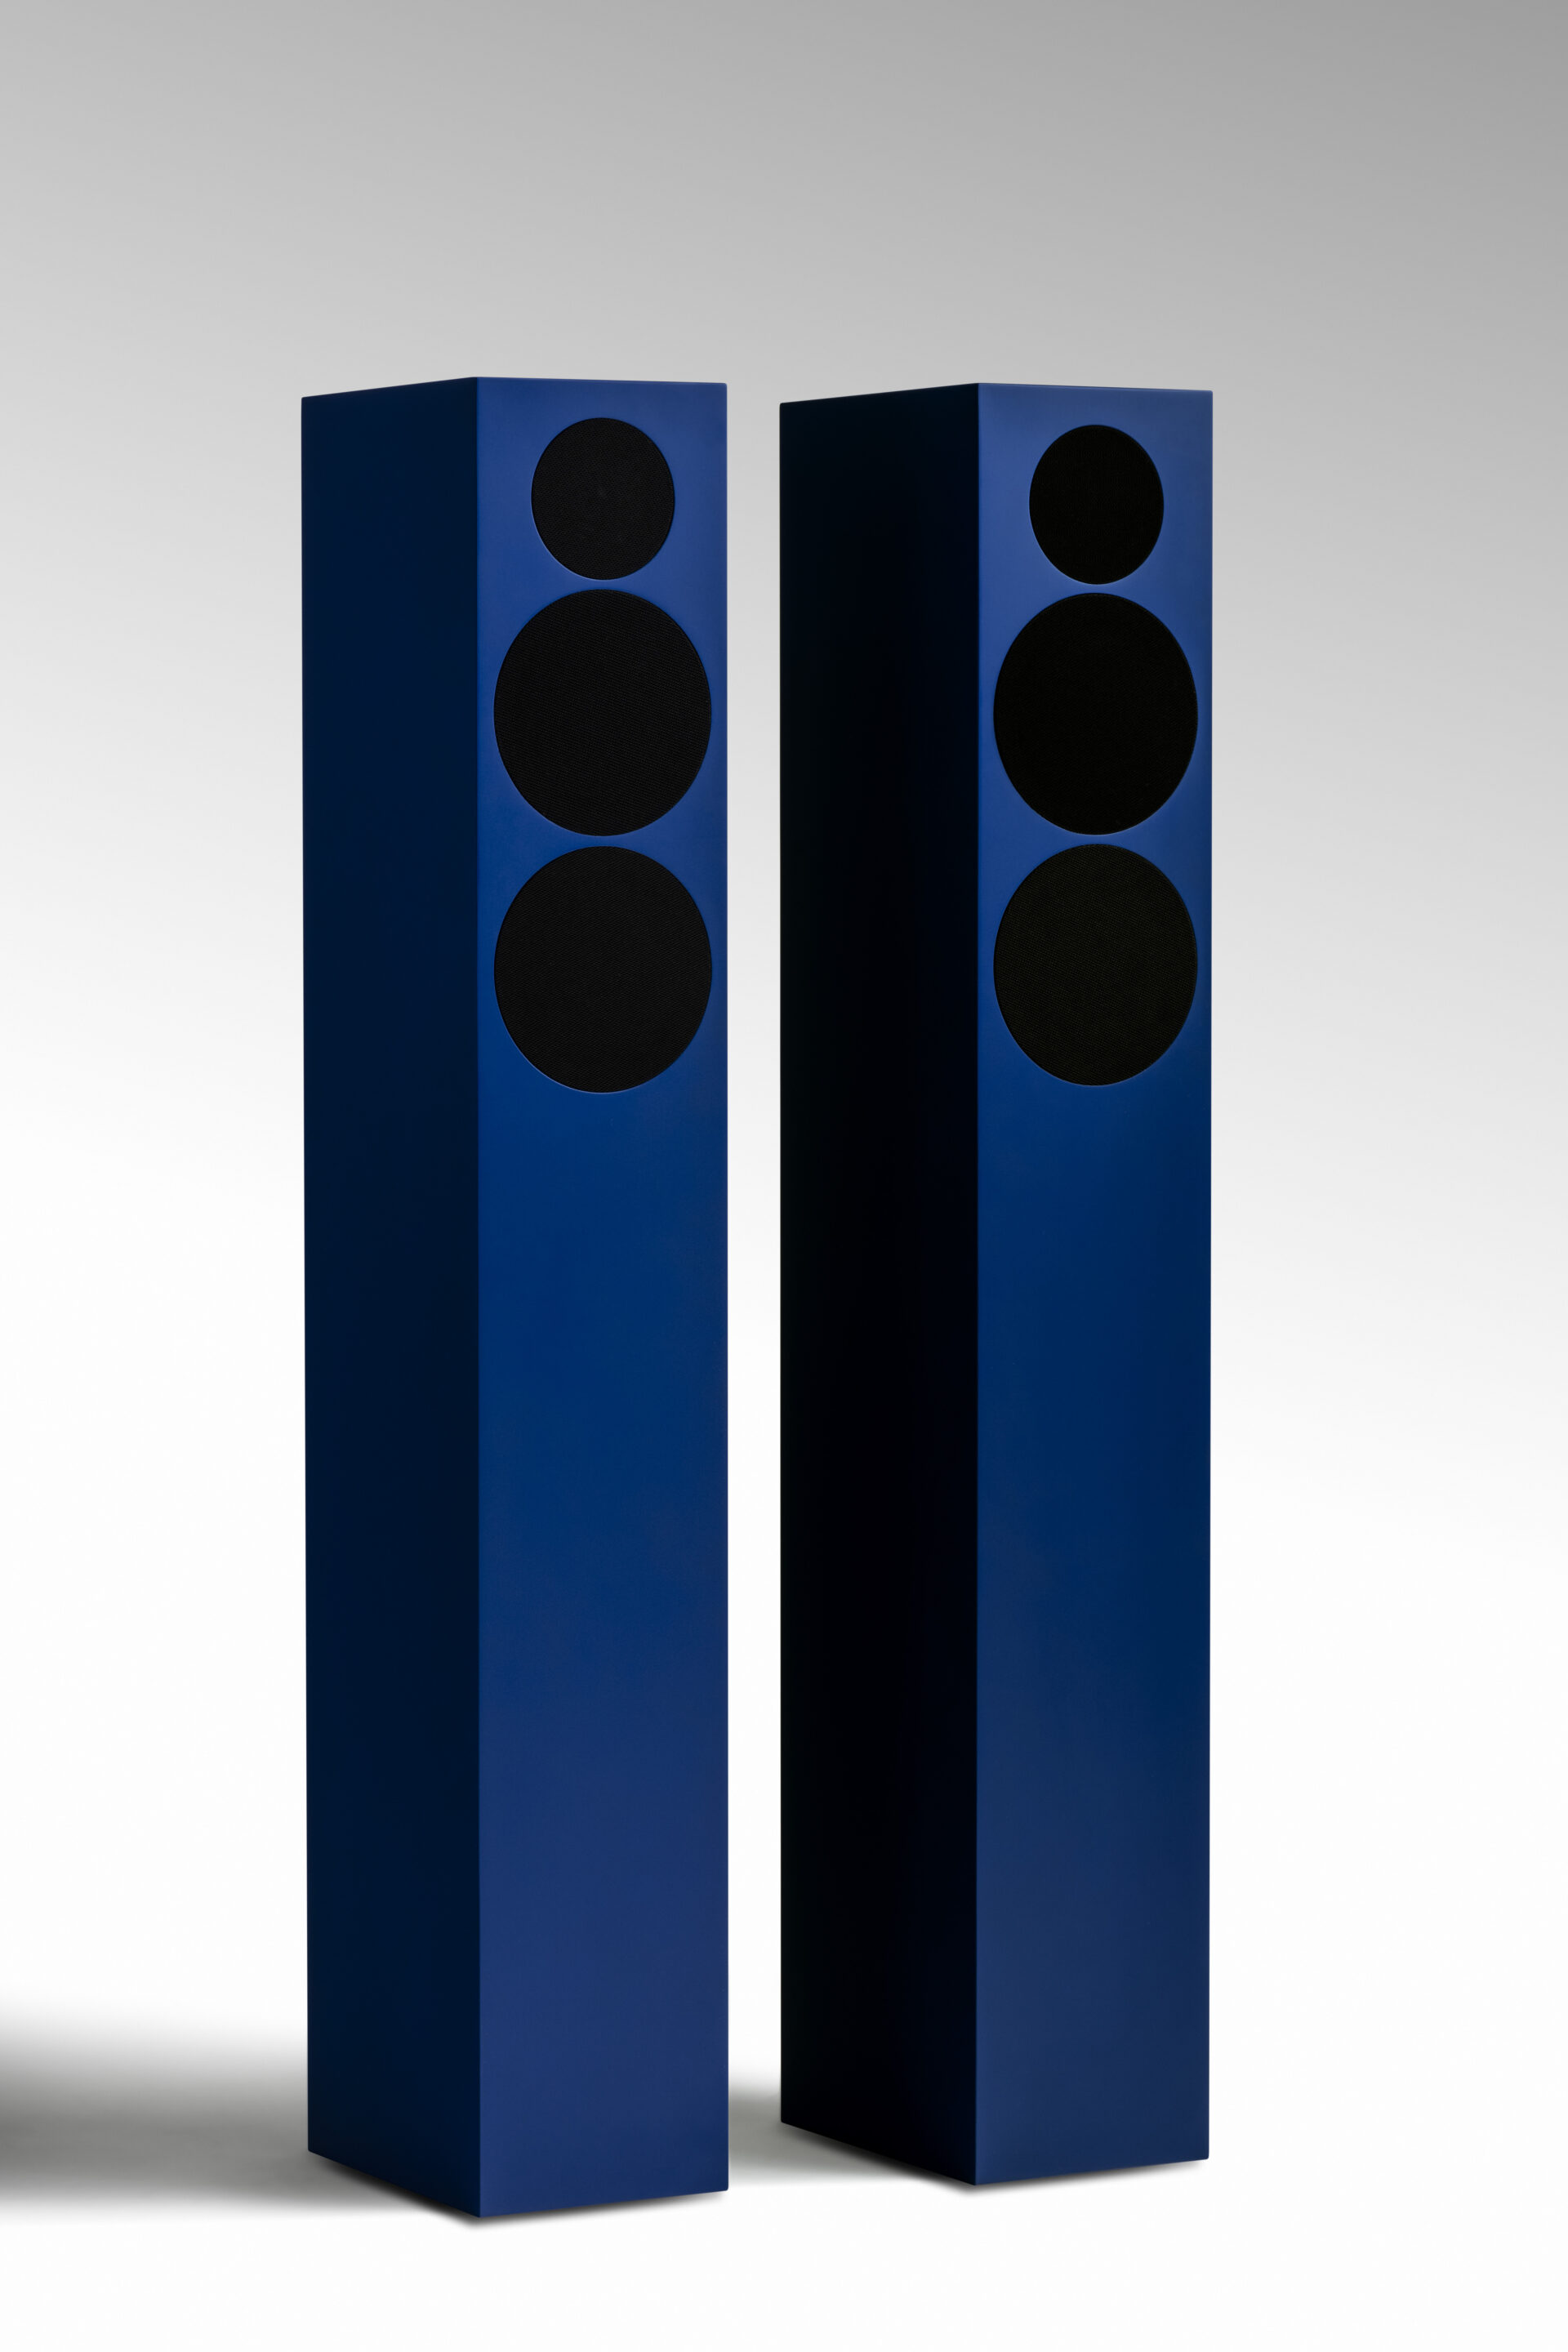 One pair of TONE Speaker L, standing in a white room on the floor. Both speakers are ultramarine blue and displayed from the frontside.